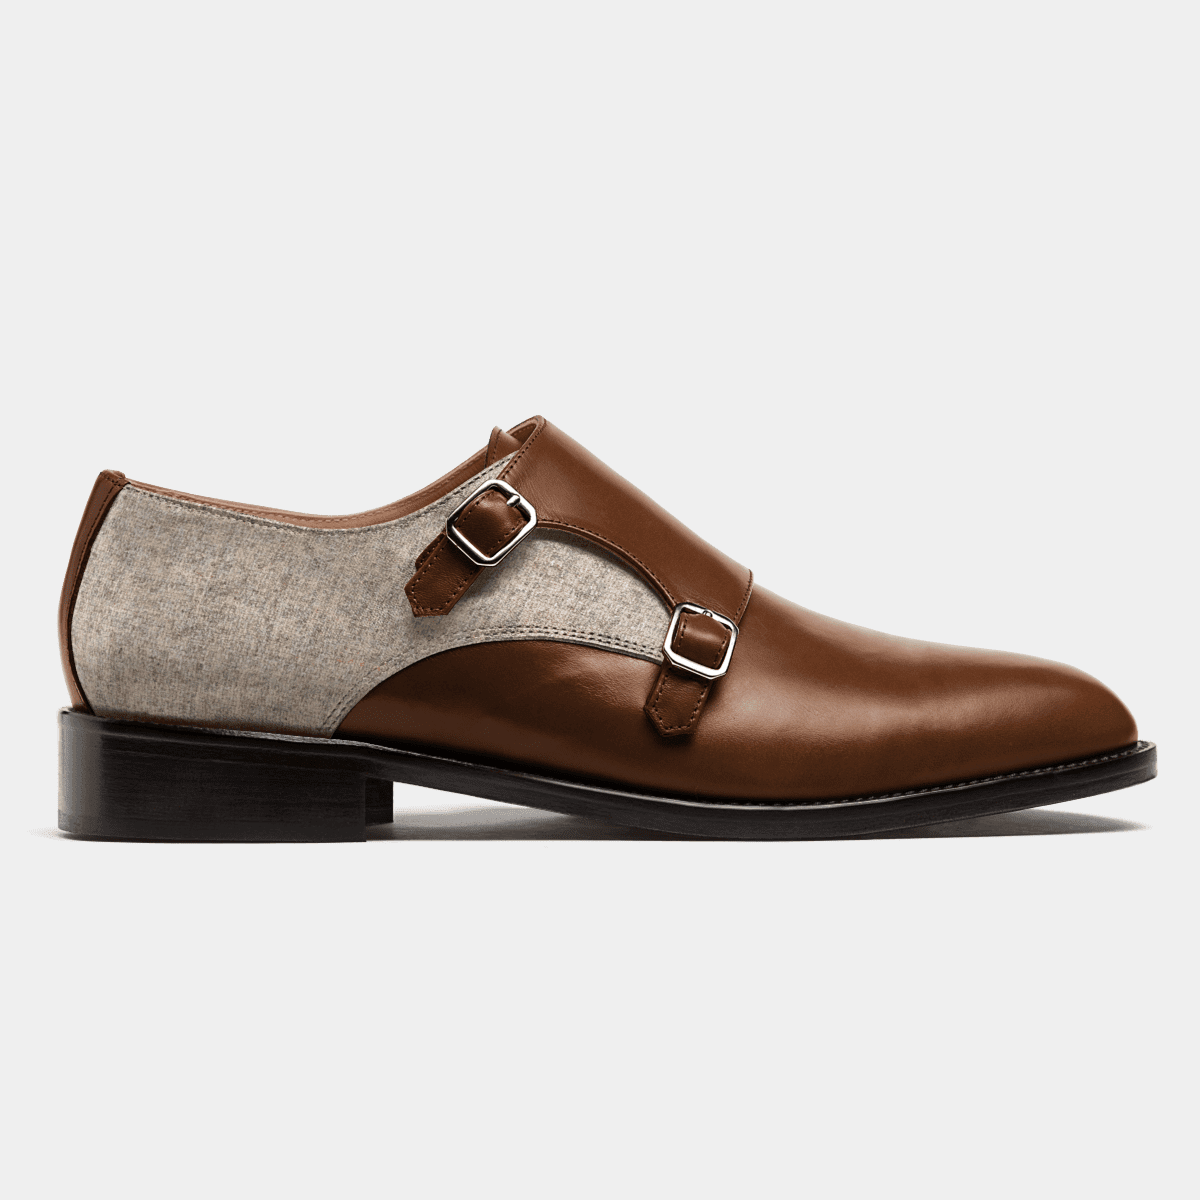 Double Monk shoes - brown & beige leather & tweed | Hockerty